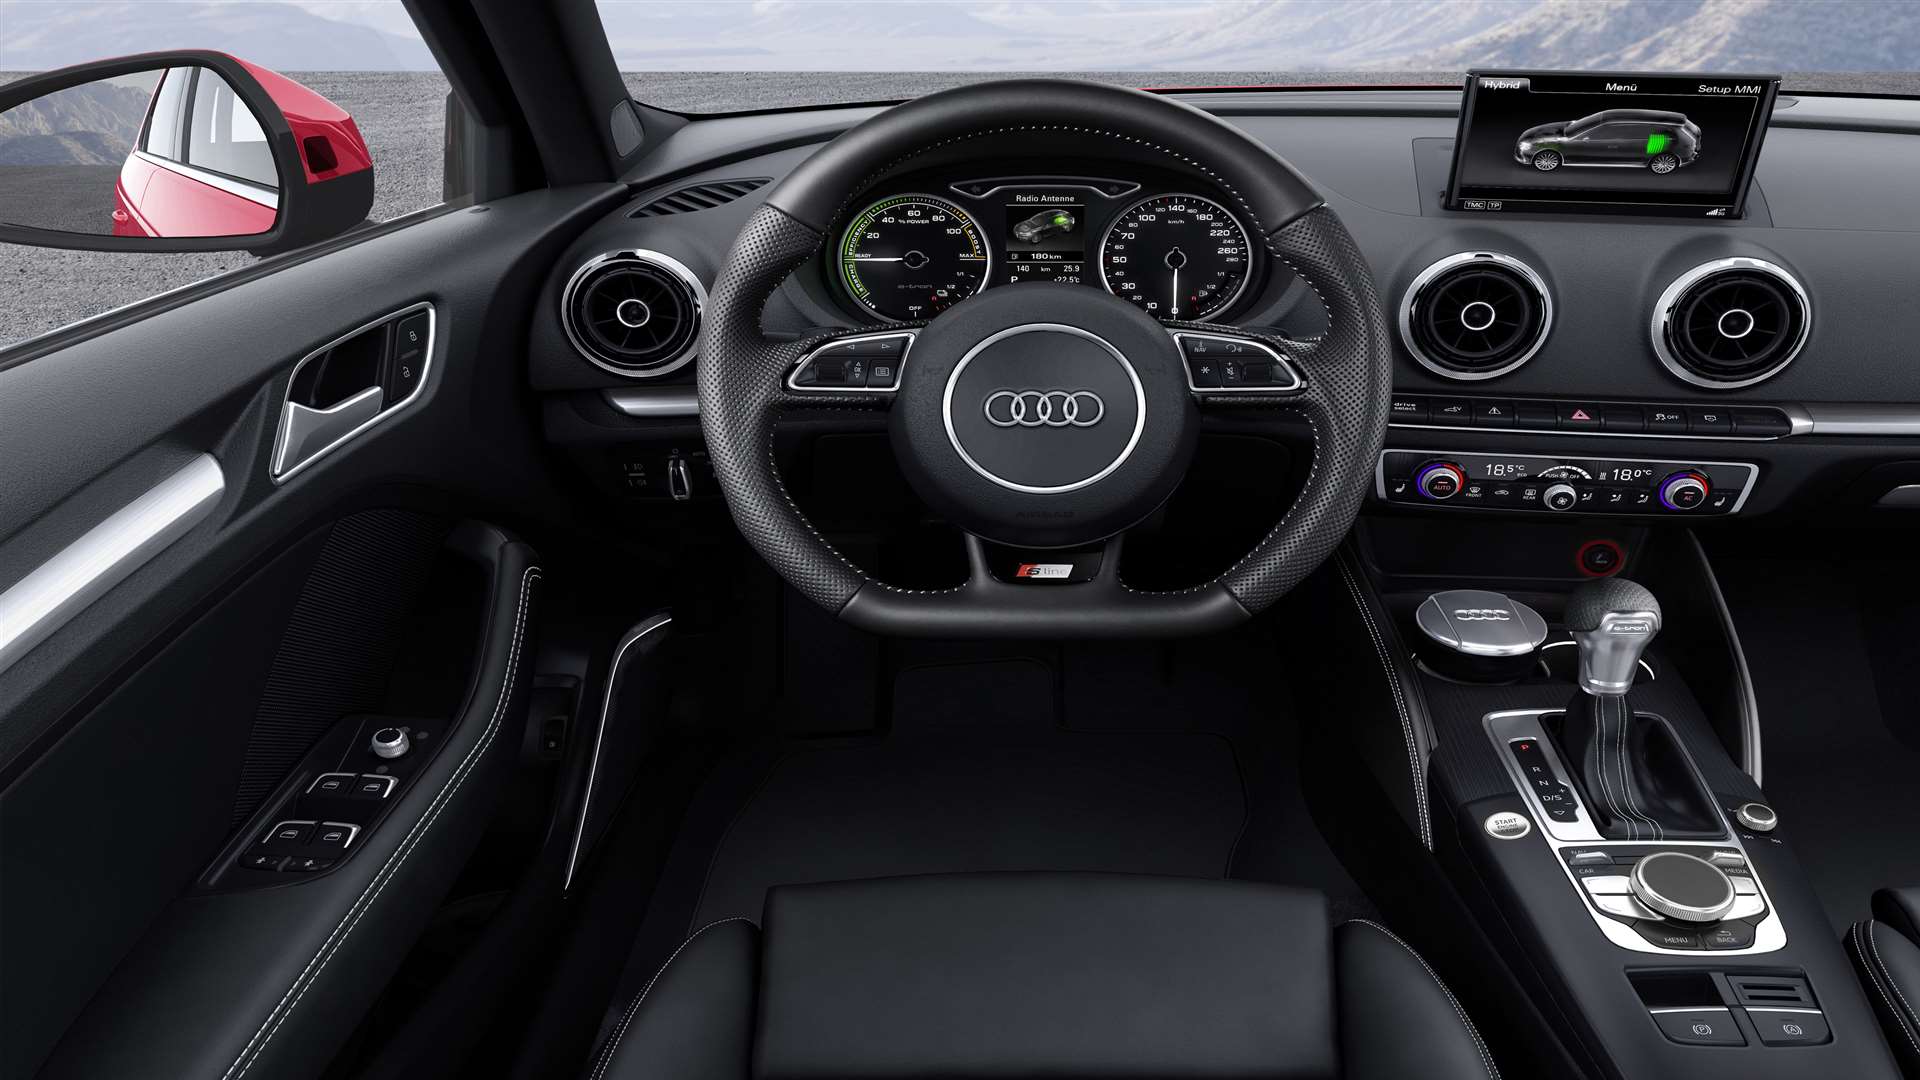 The e-tron's interior bears all the Audi hallmarks of quality and craftsmanship